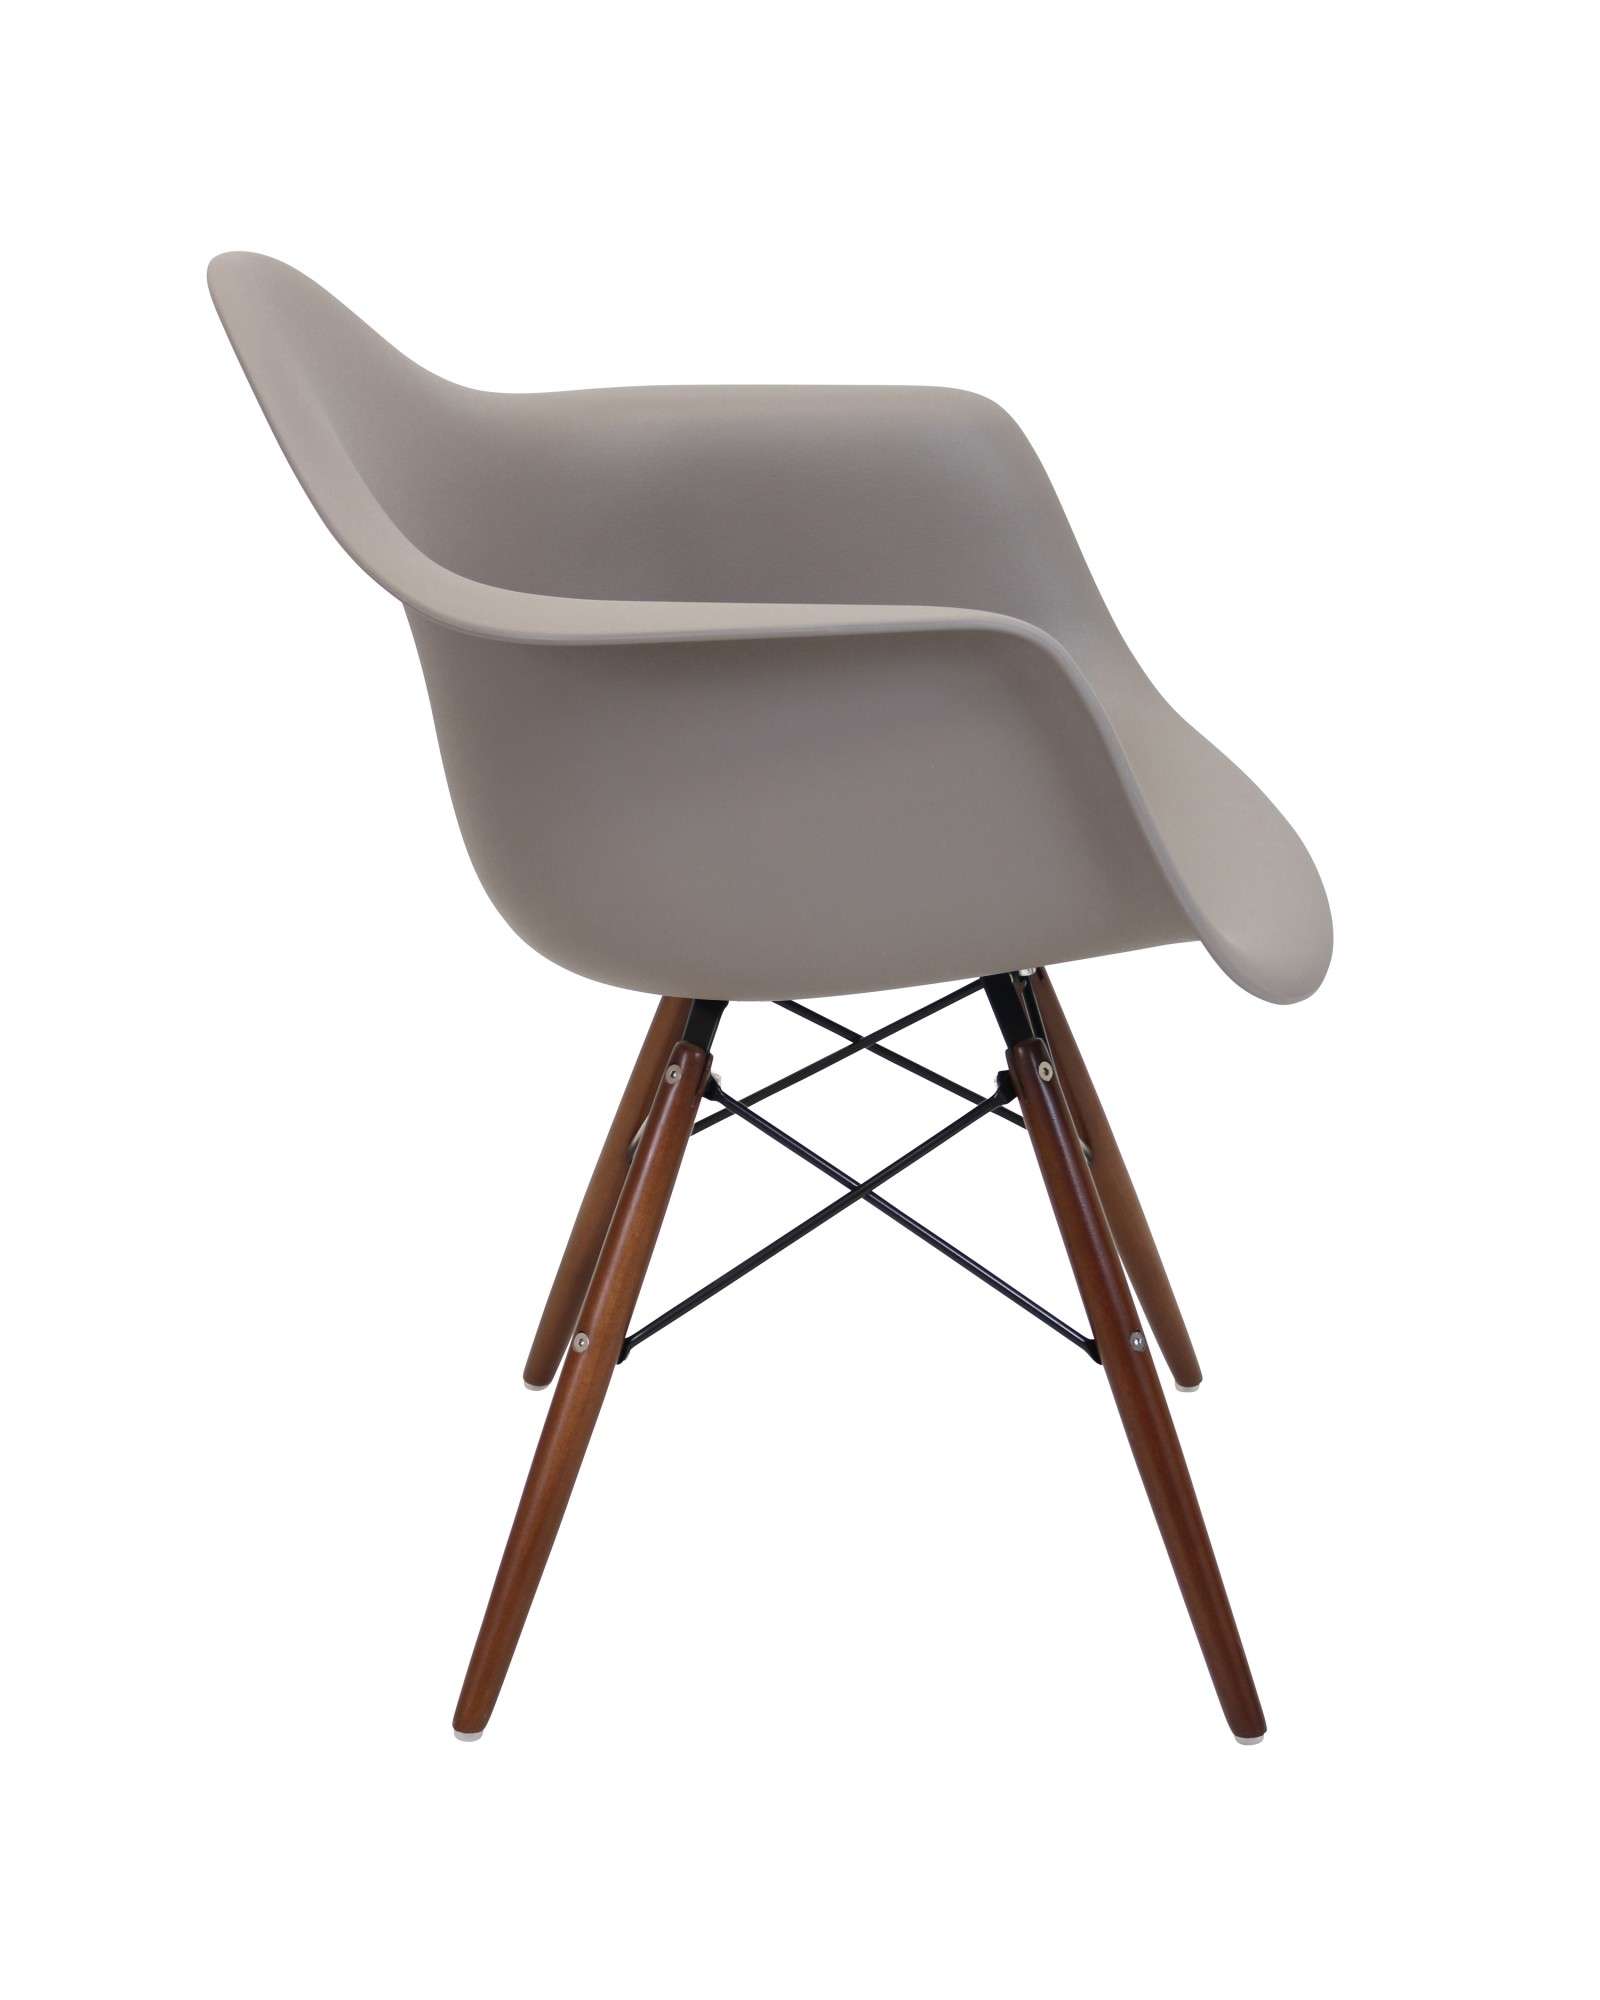 Neo Flair Mid-Century Modern Chair in Cappuccino and Espresso - Set of 2